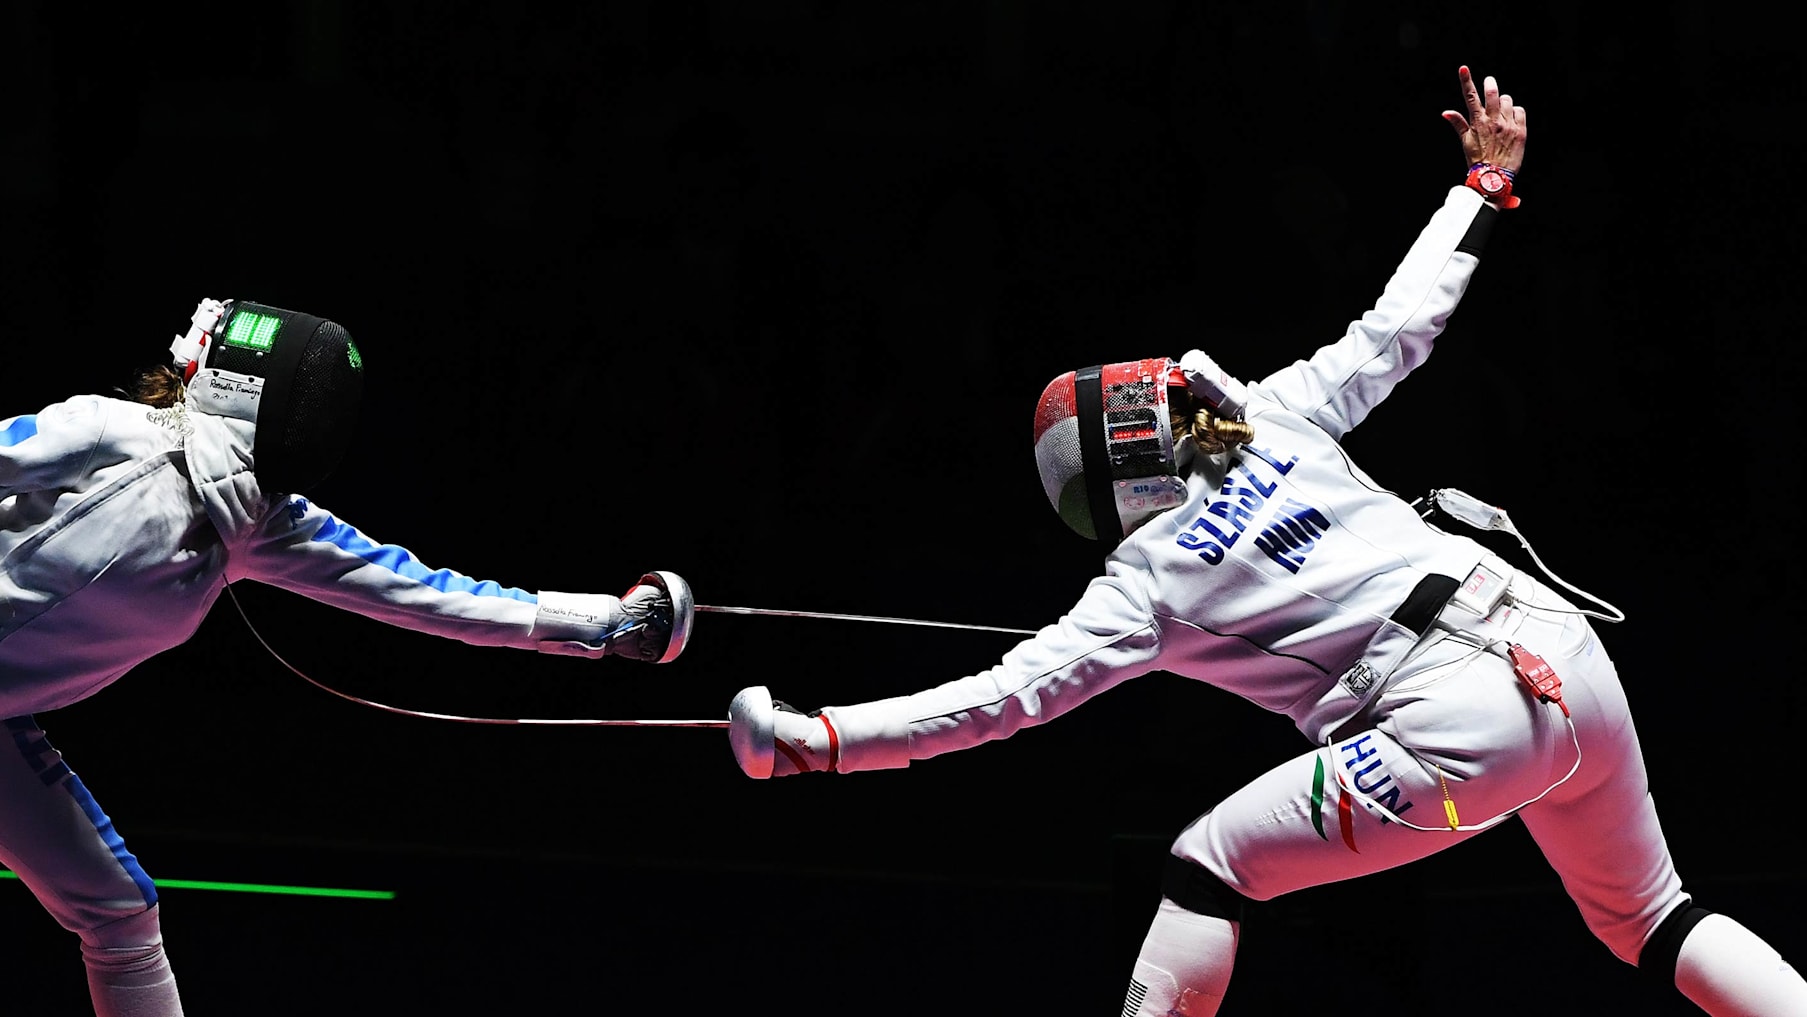 From duelling at dawn to wireless scoring fencing through the ages with Olympic champion Szasz